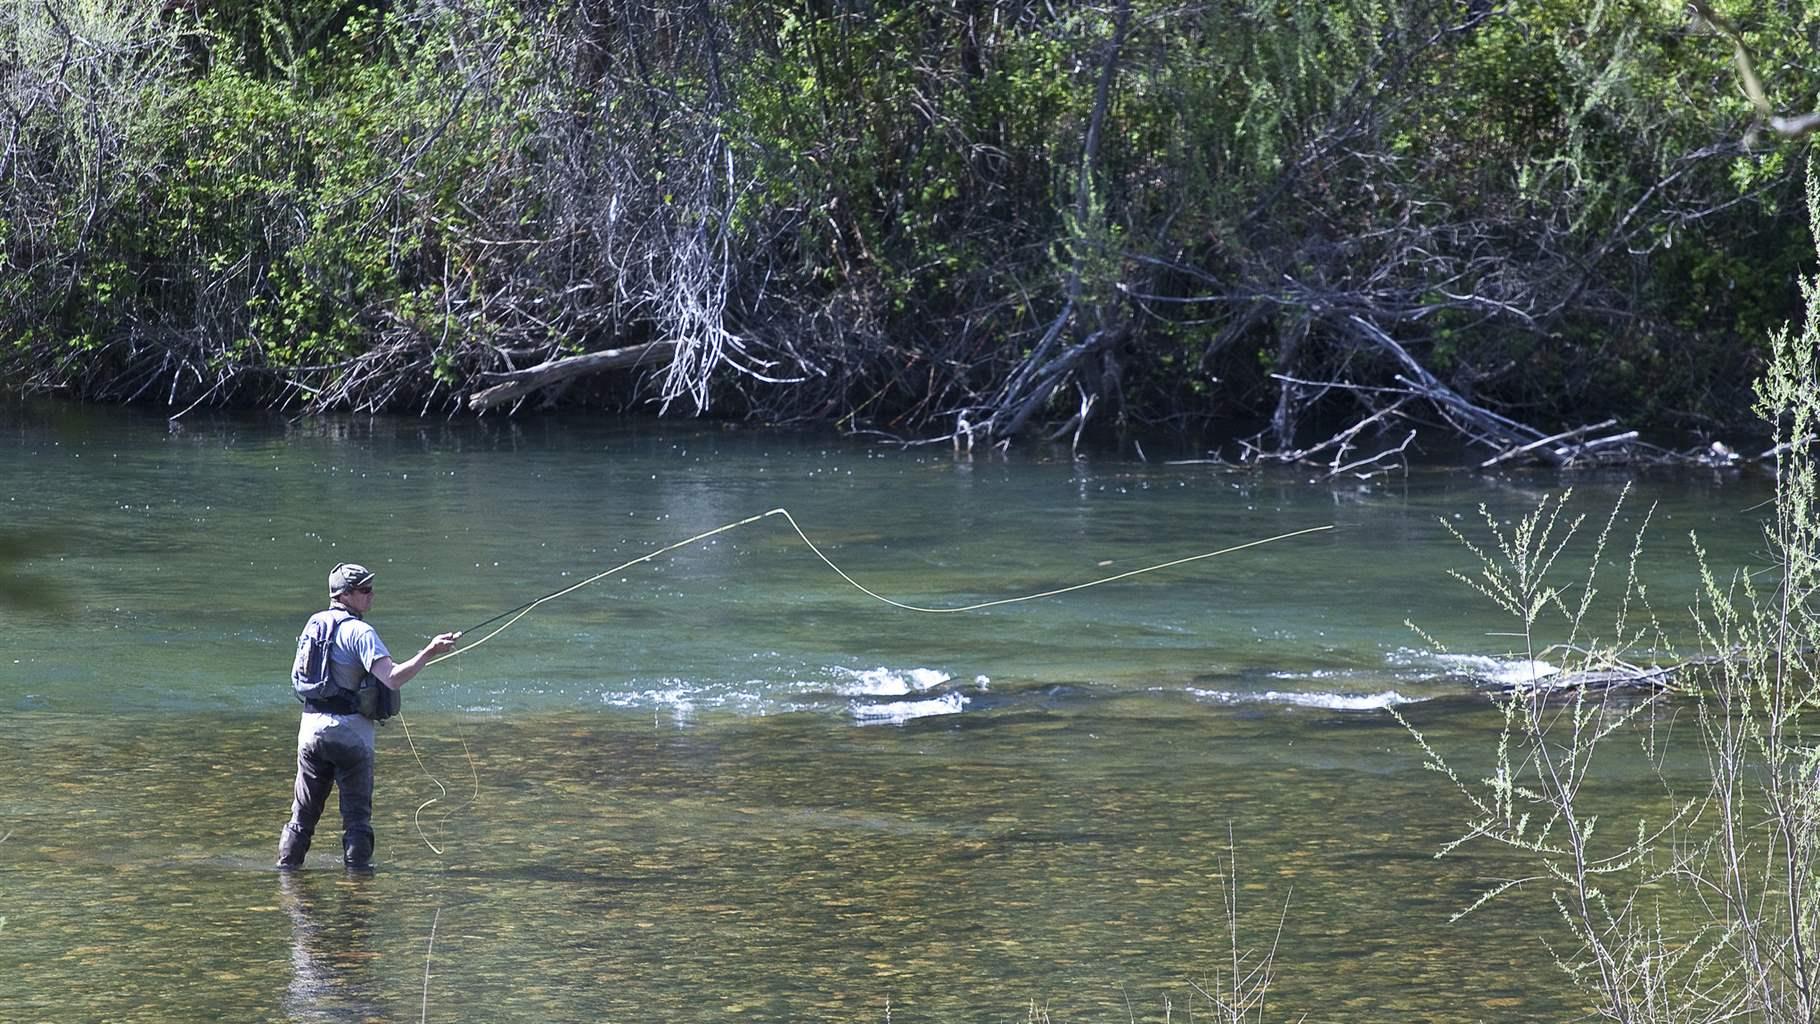 Bill Seeks to Protect Miles of Northwest California Rivers | The Pew Charitable Trusts